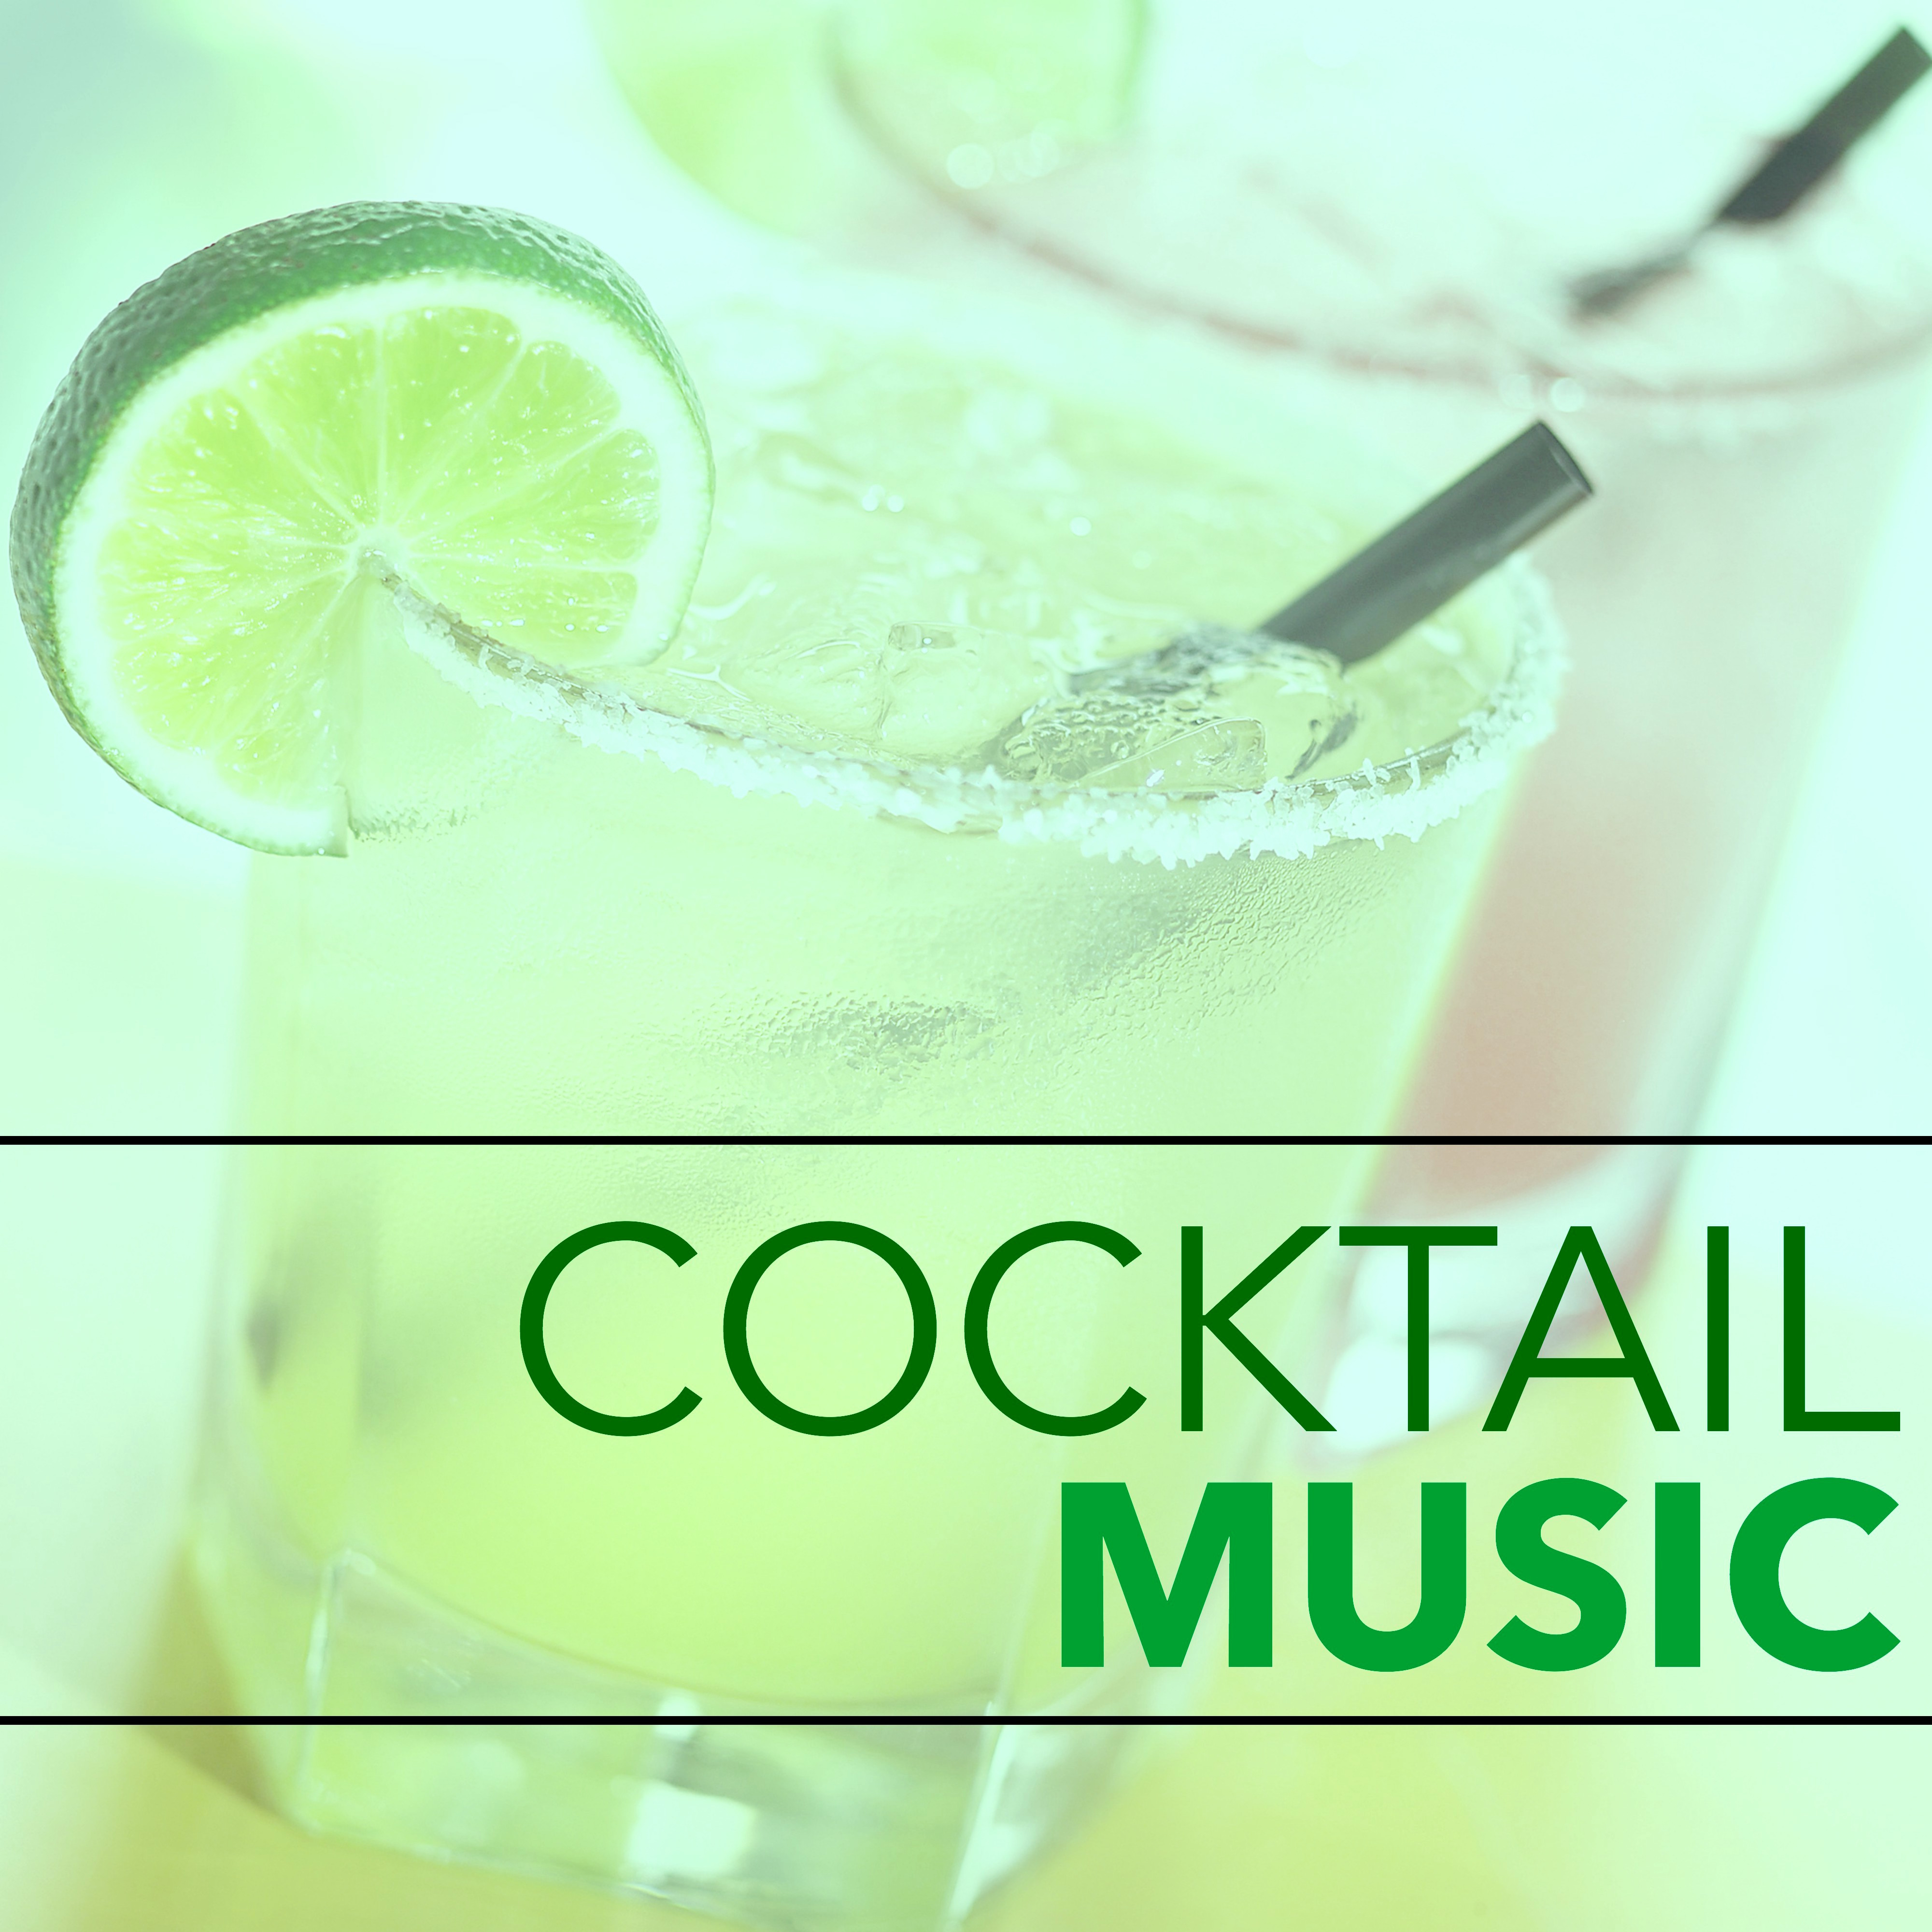 Cocktail Music – Relaxing Jazz Music for Drinks and Dinner, Piano Sax and Guitar Smooth Jazz Songs